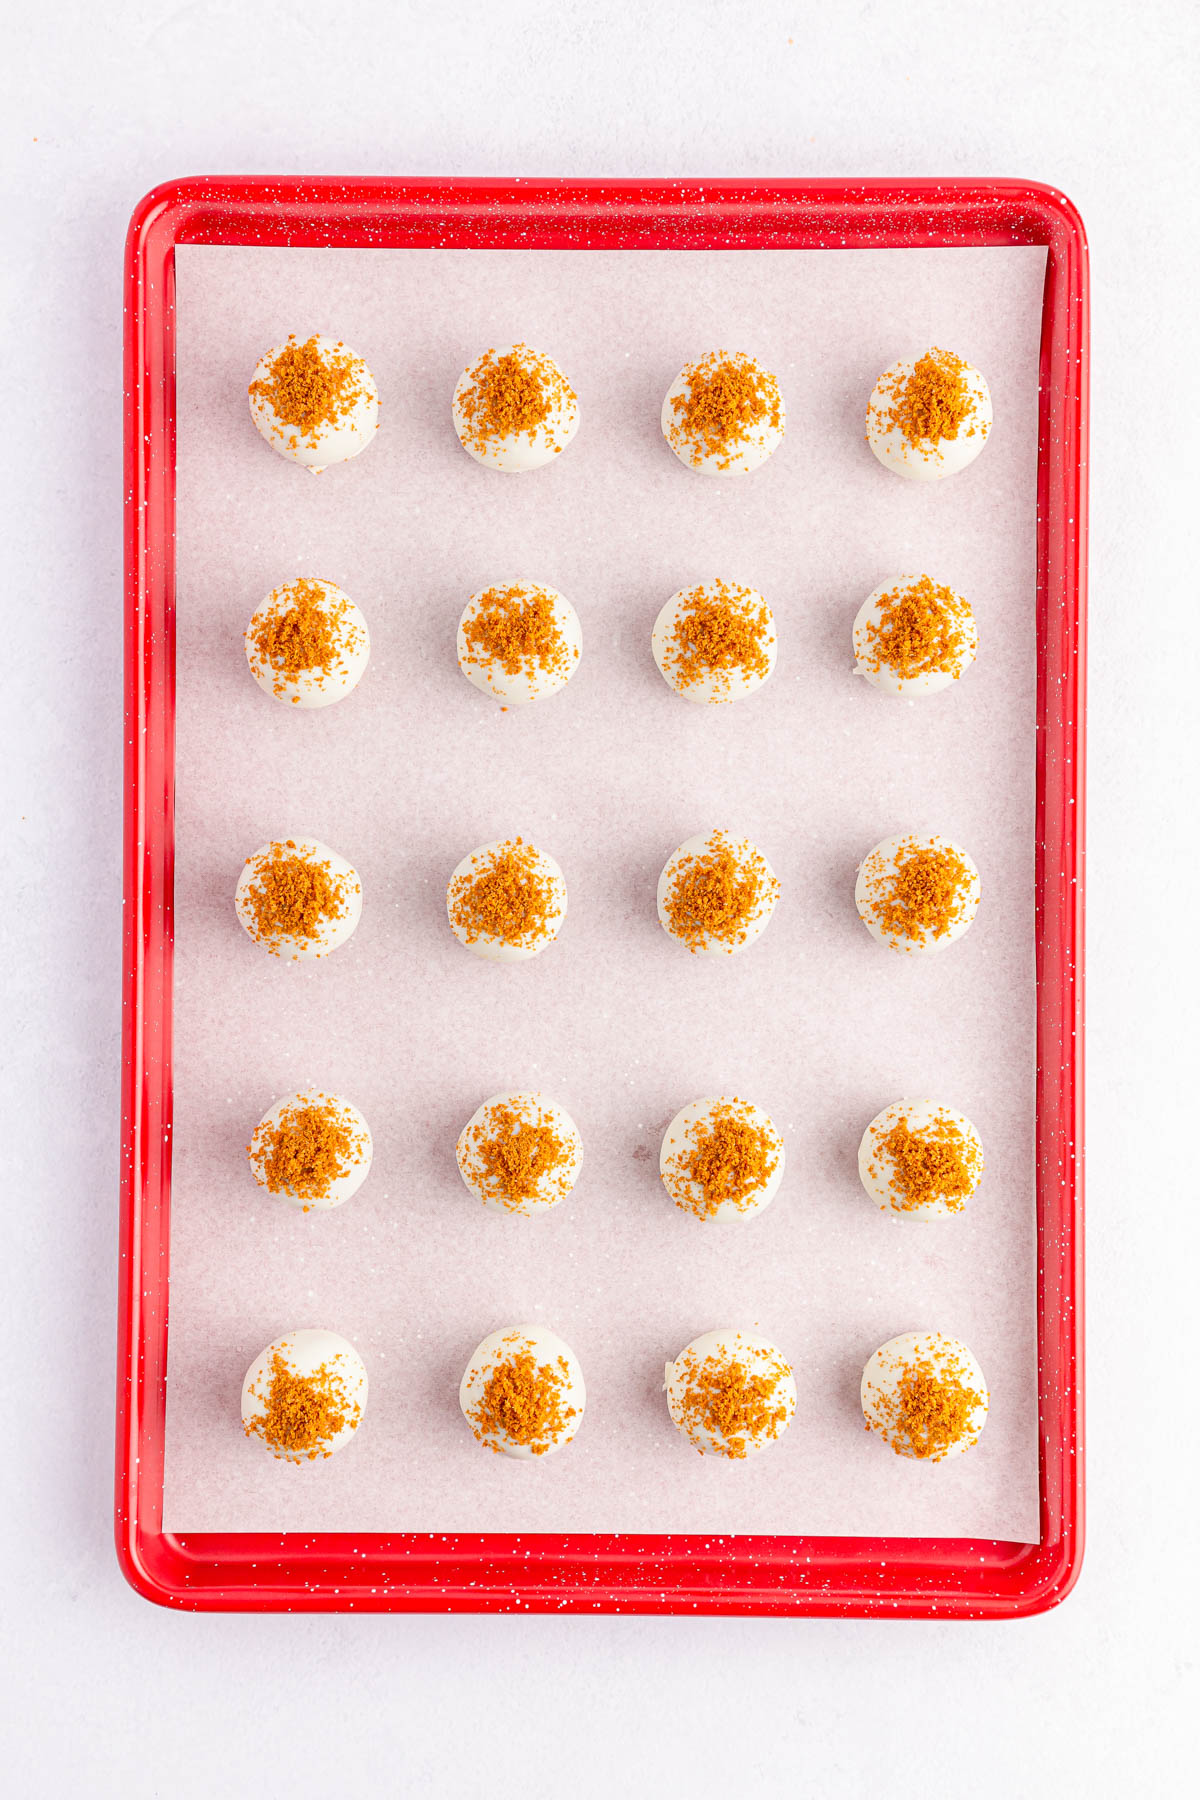 Biscoff Truffles topped with Biscoff crumbs on cookie sheet